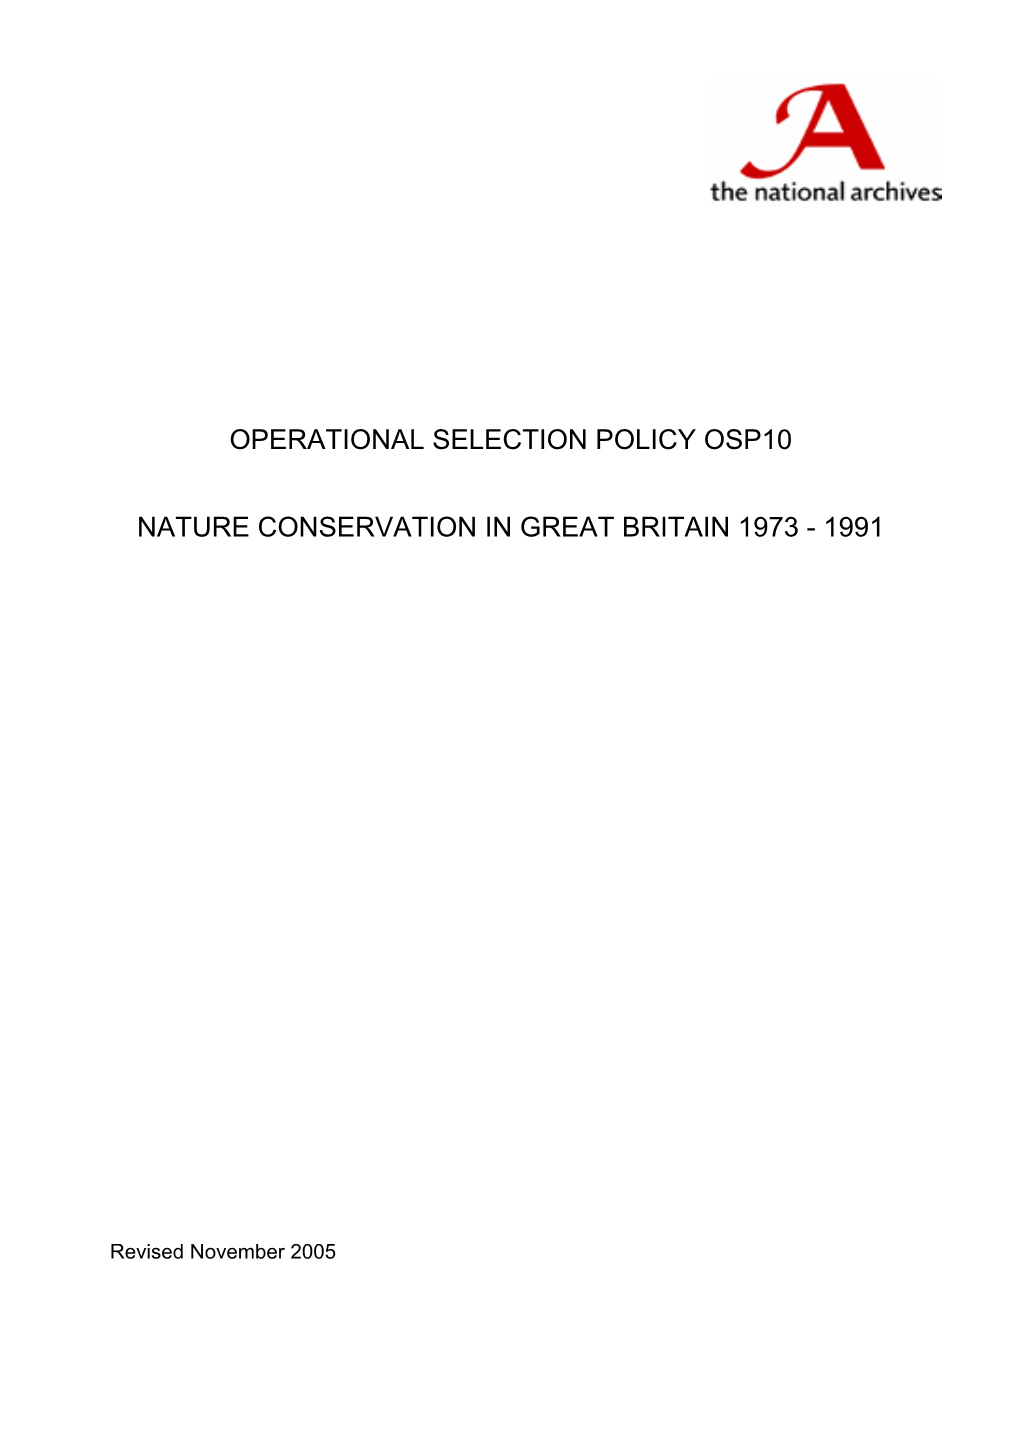 OSP10: Nature Conservation in Great Britain 1973-1991